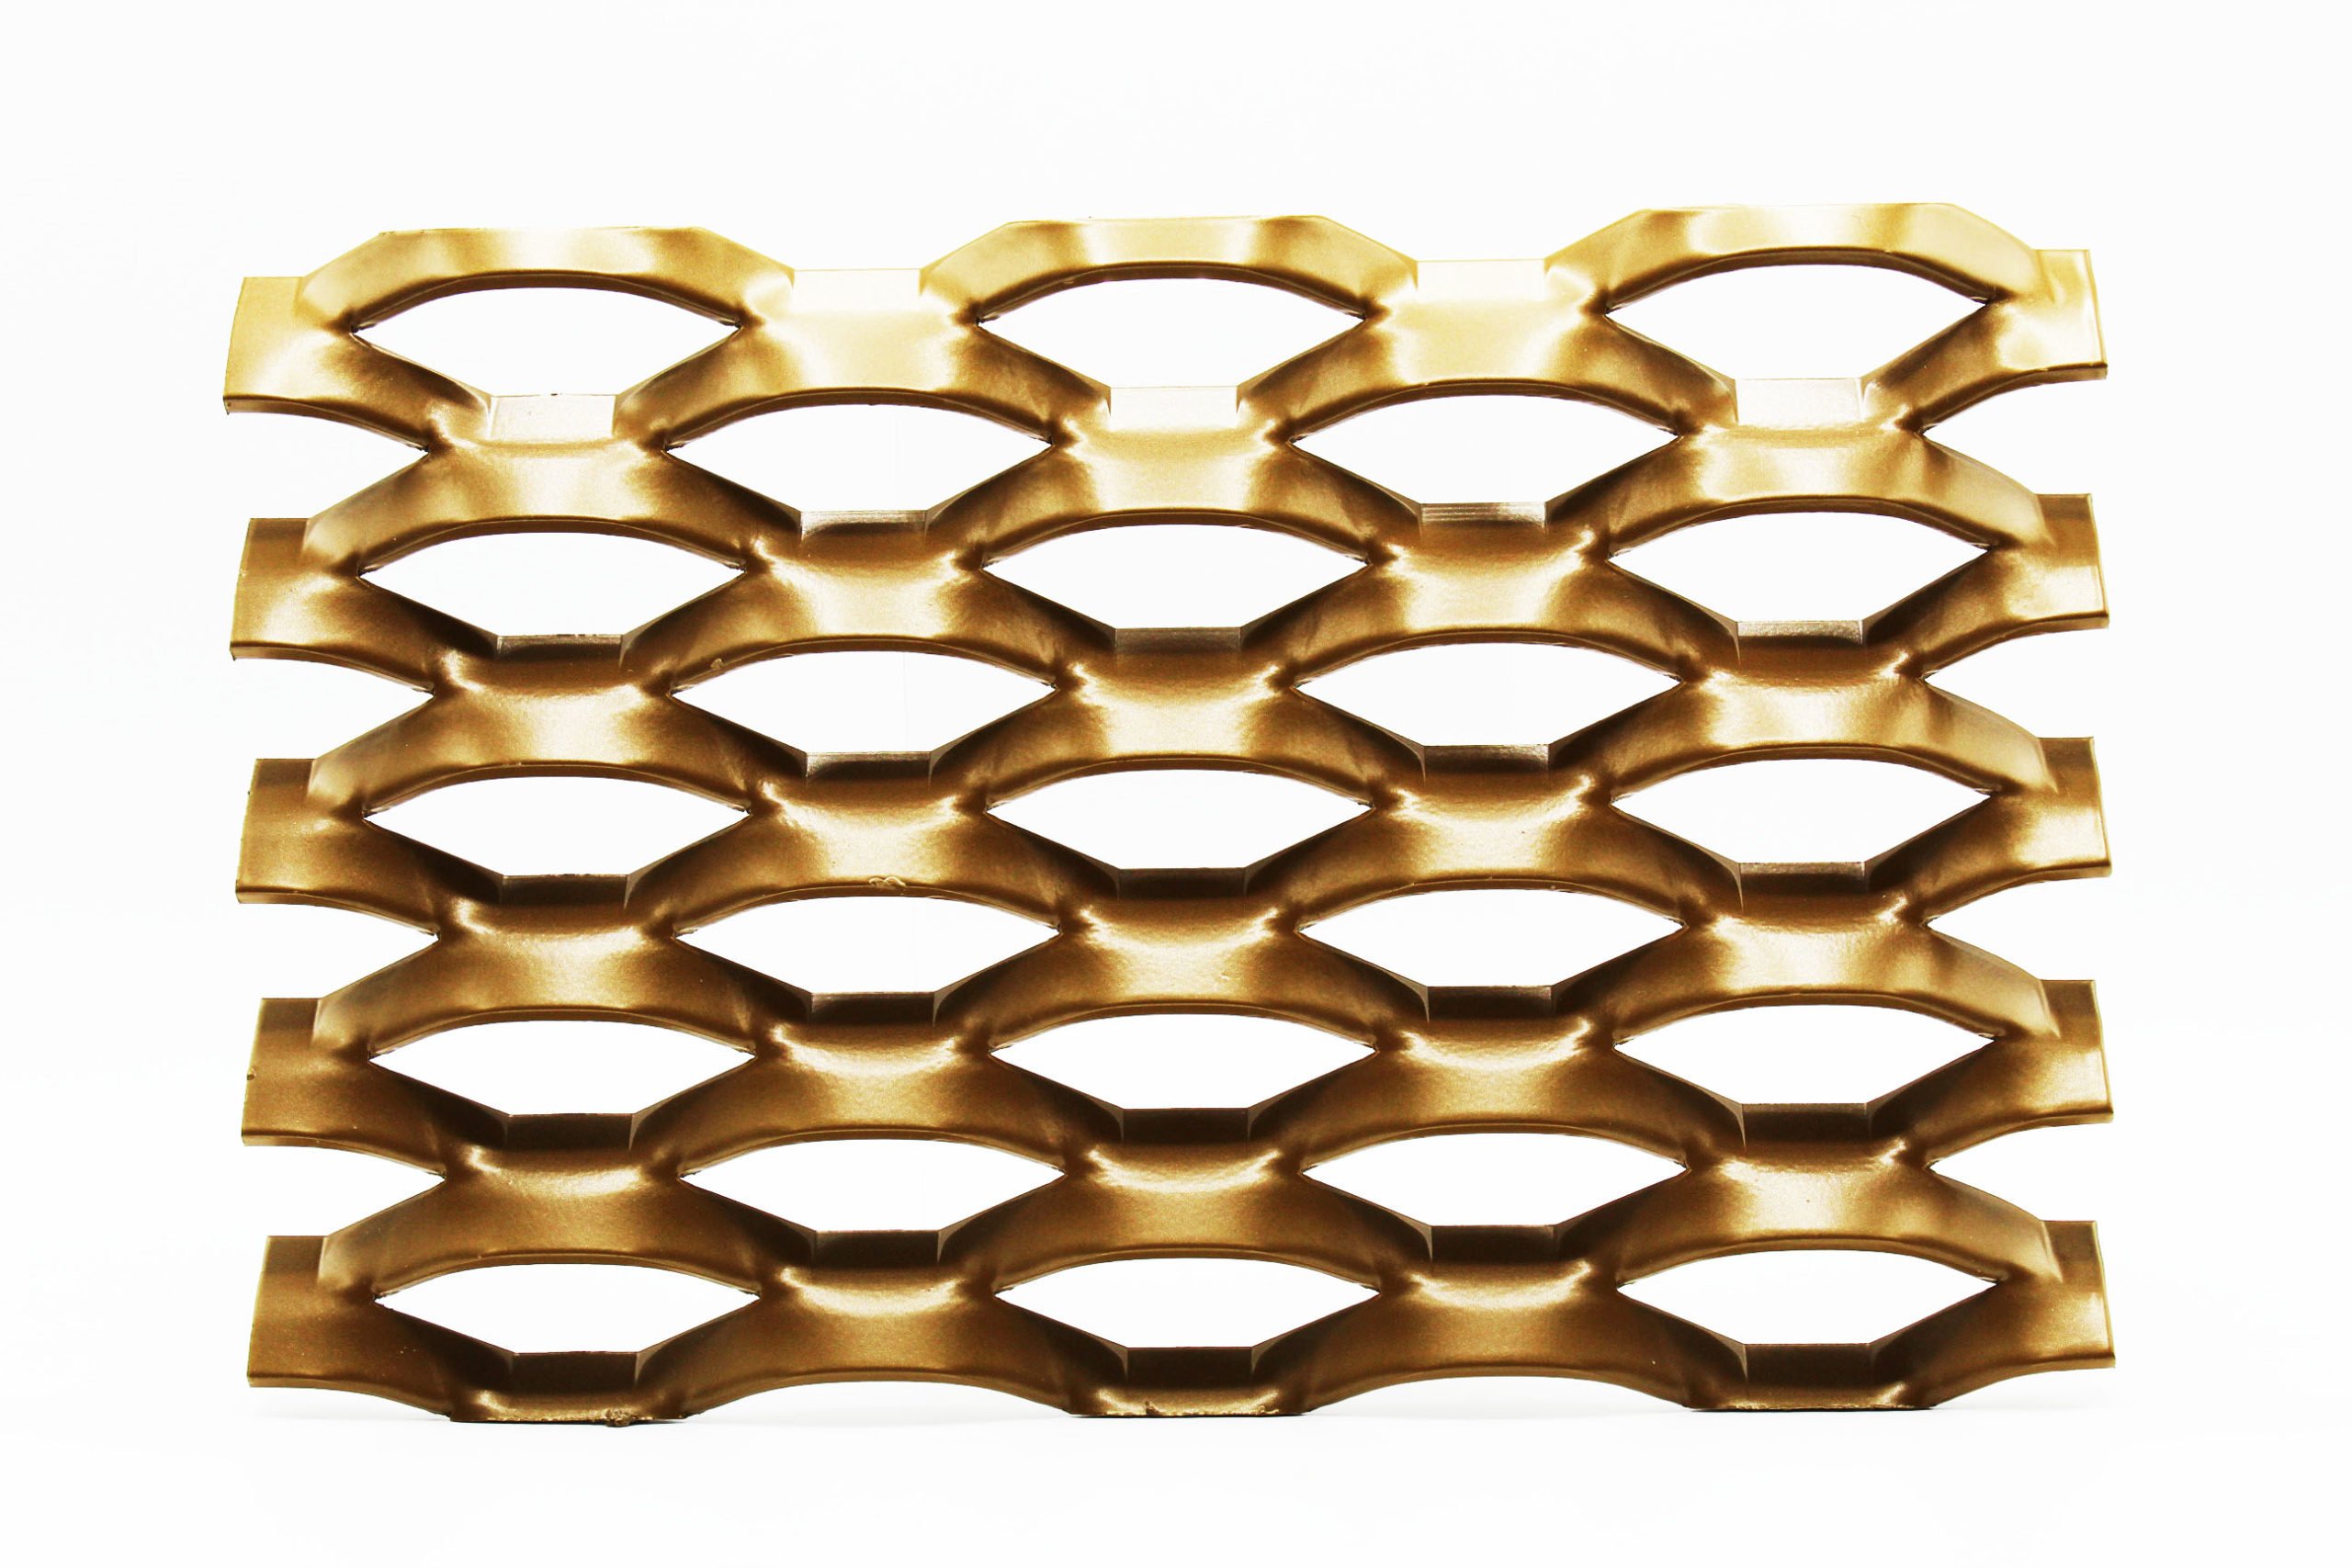 Mancunia gold expanded architectural mesh